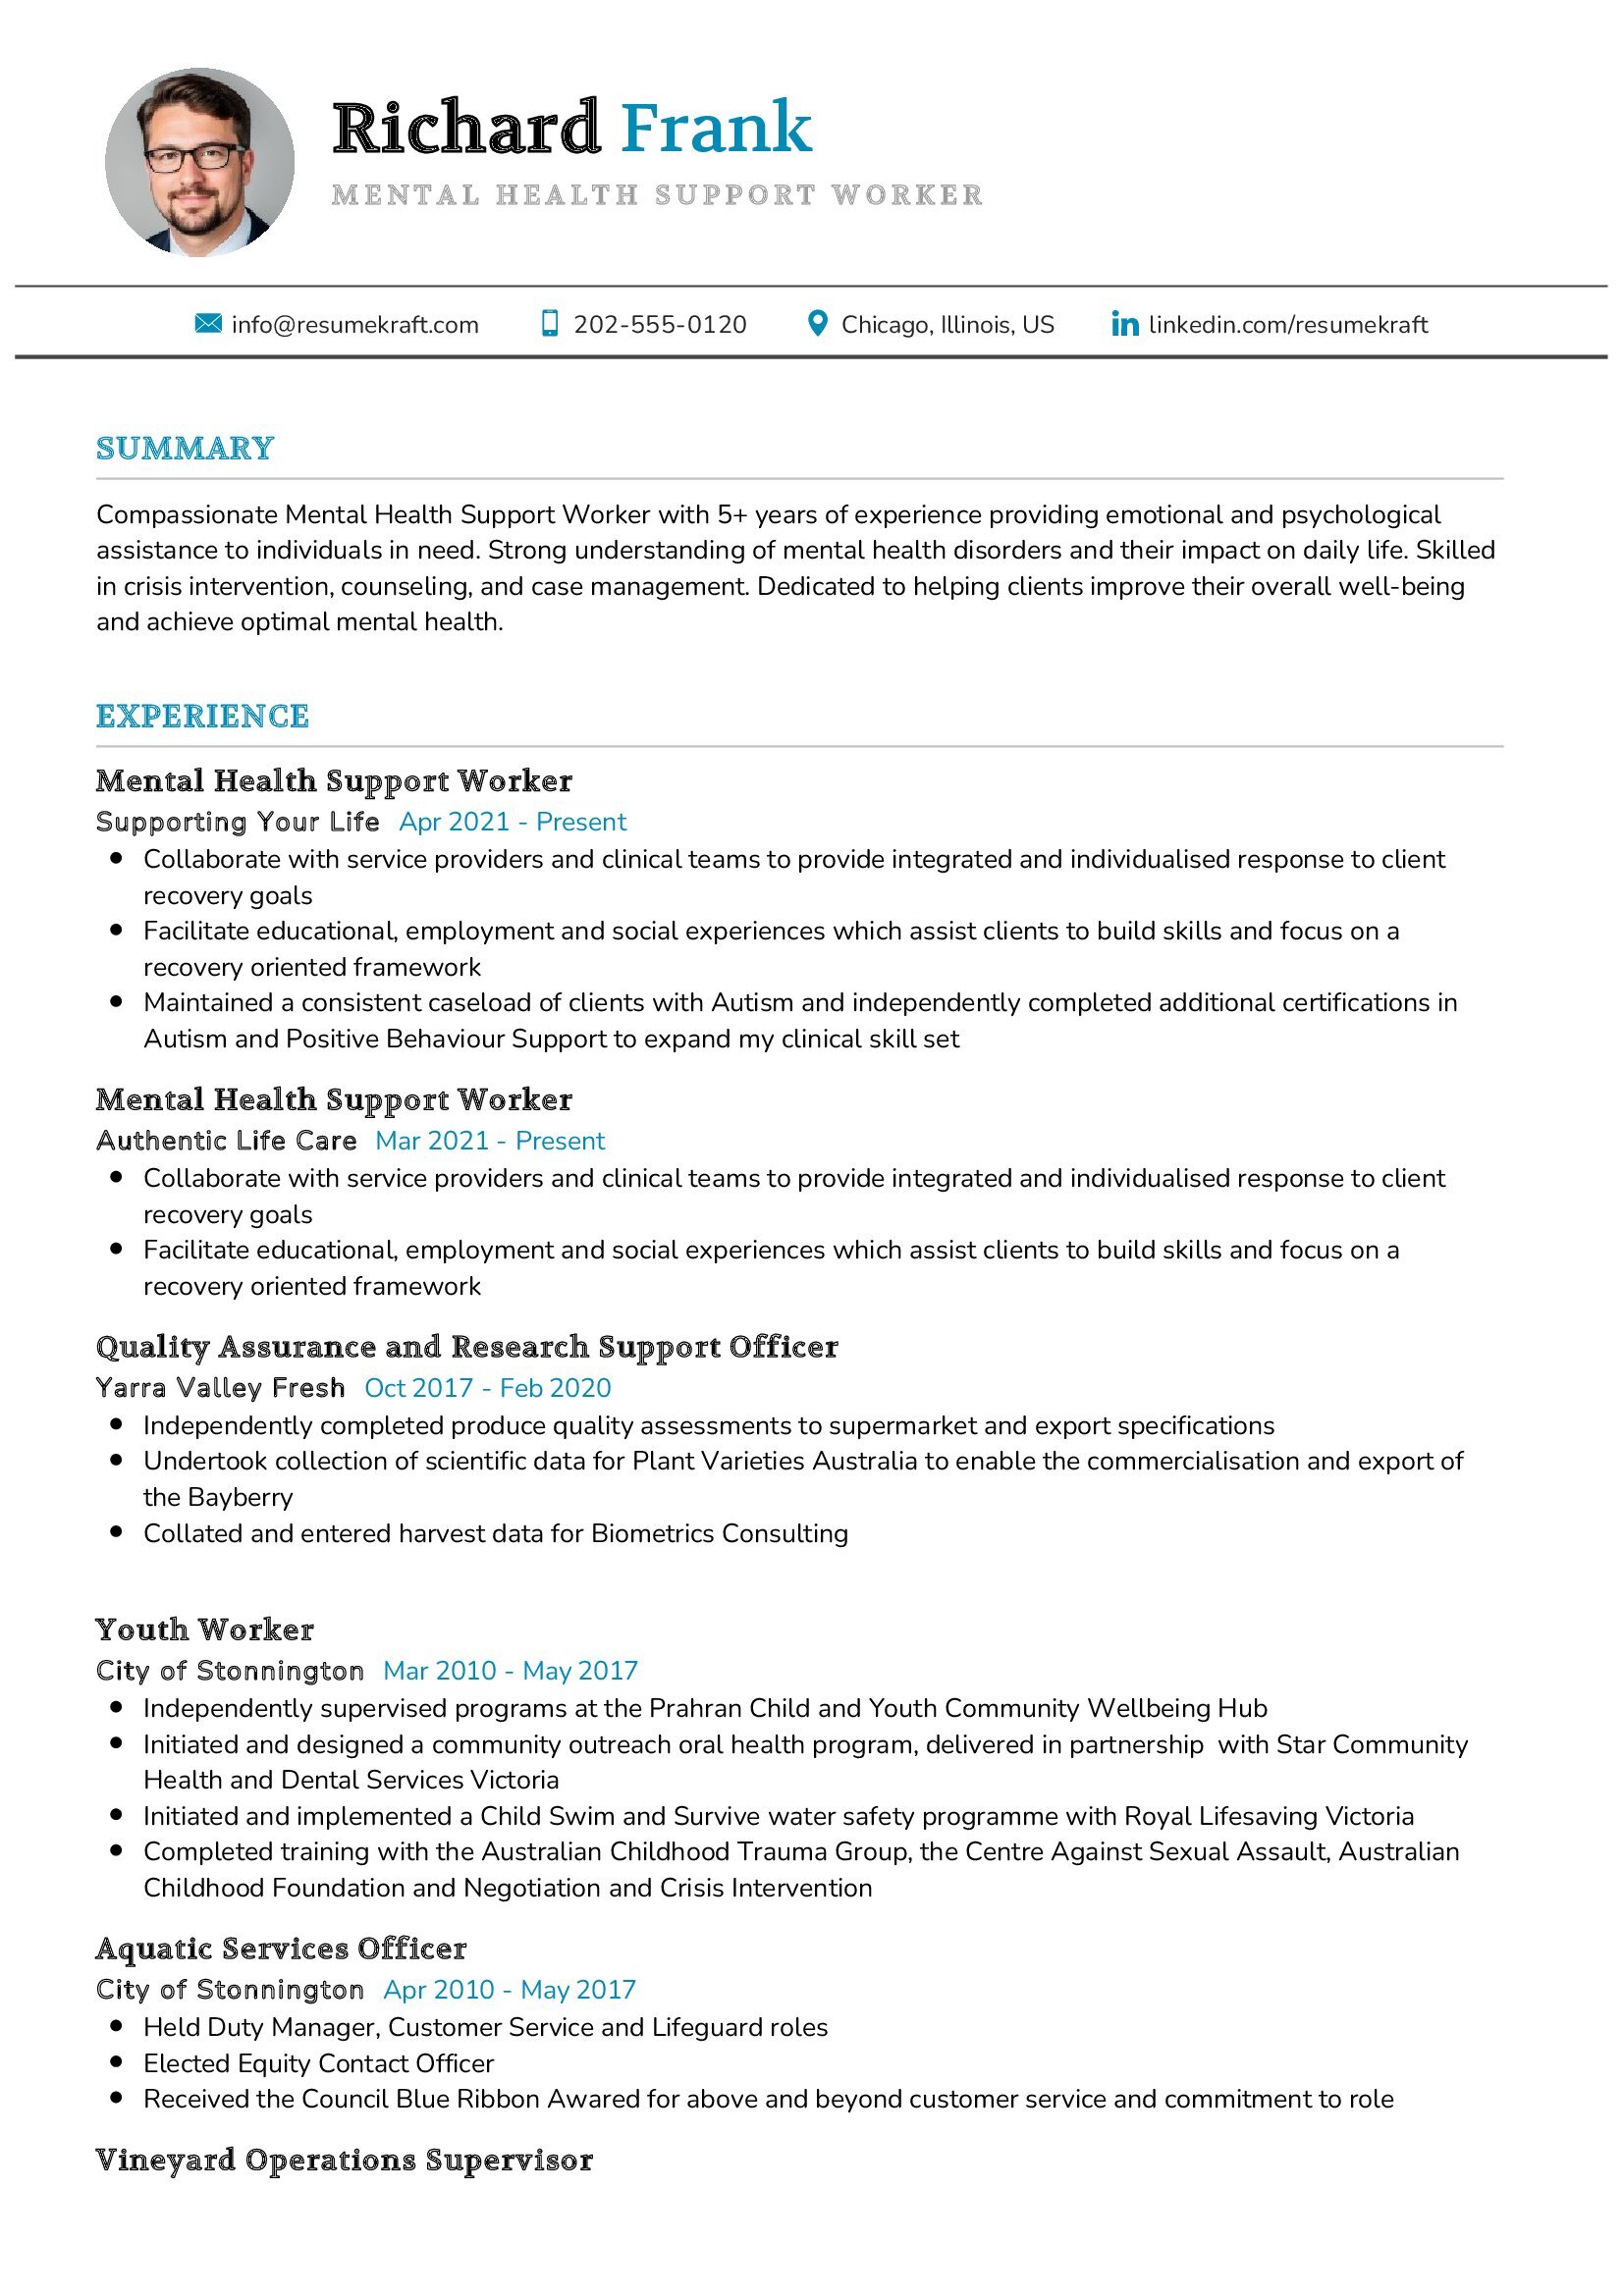 resume for mental health support worker